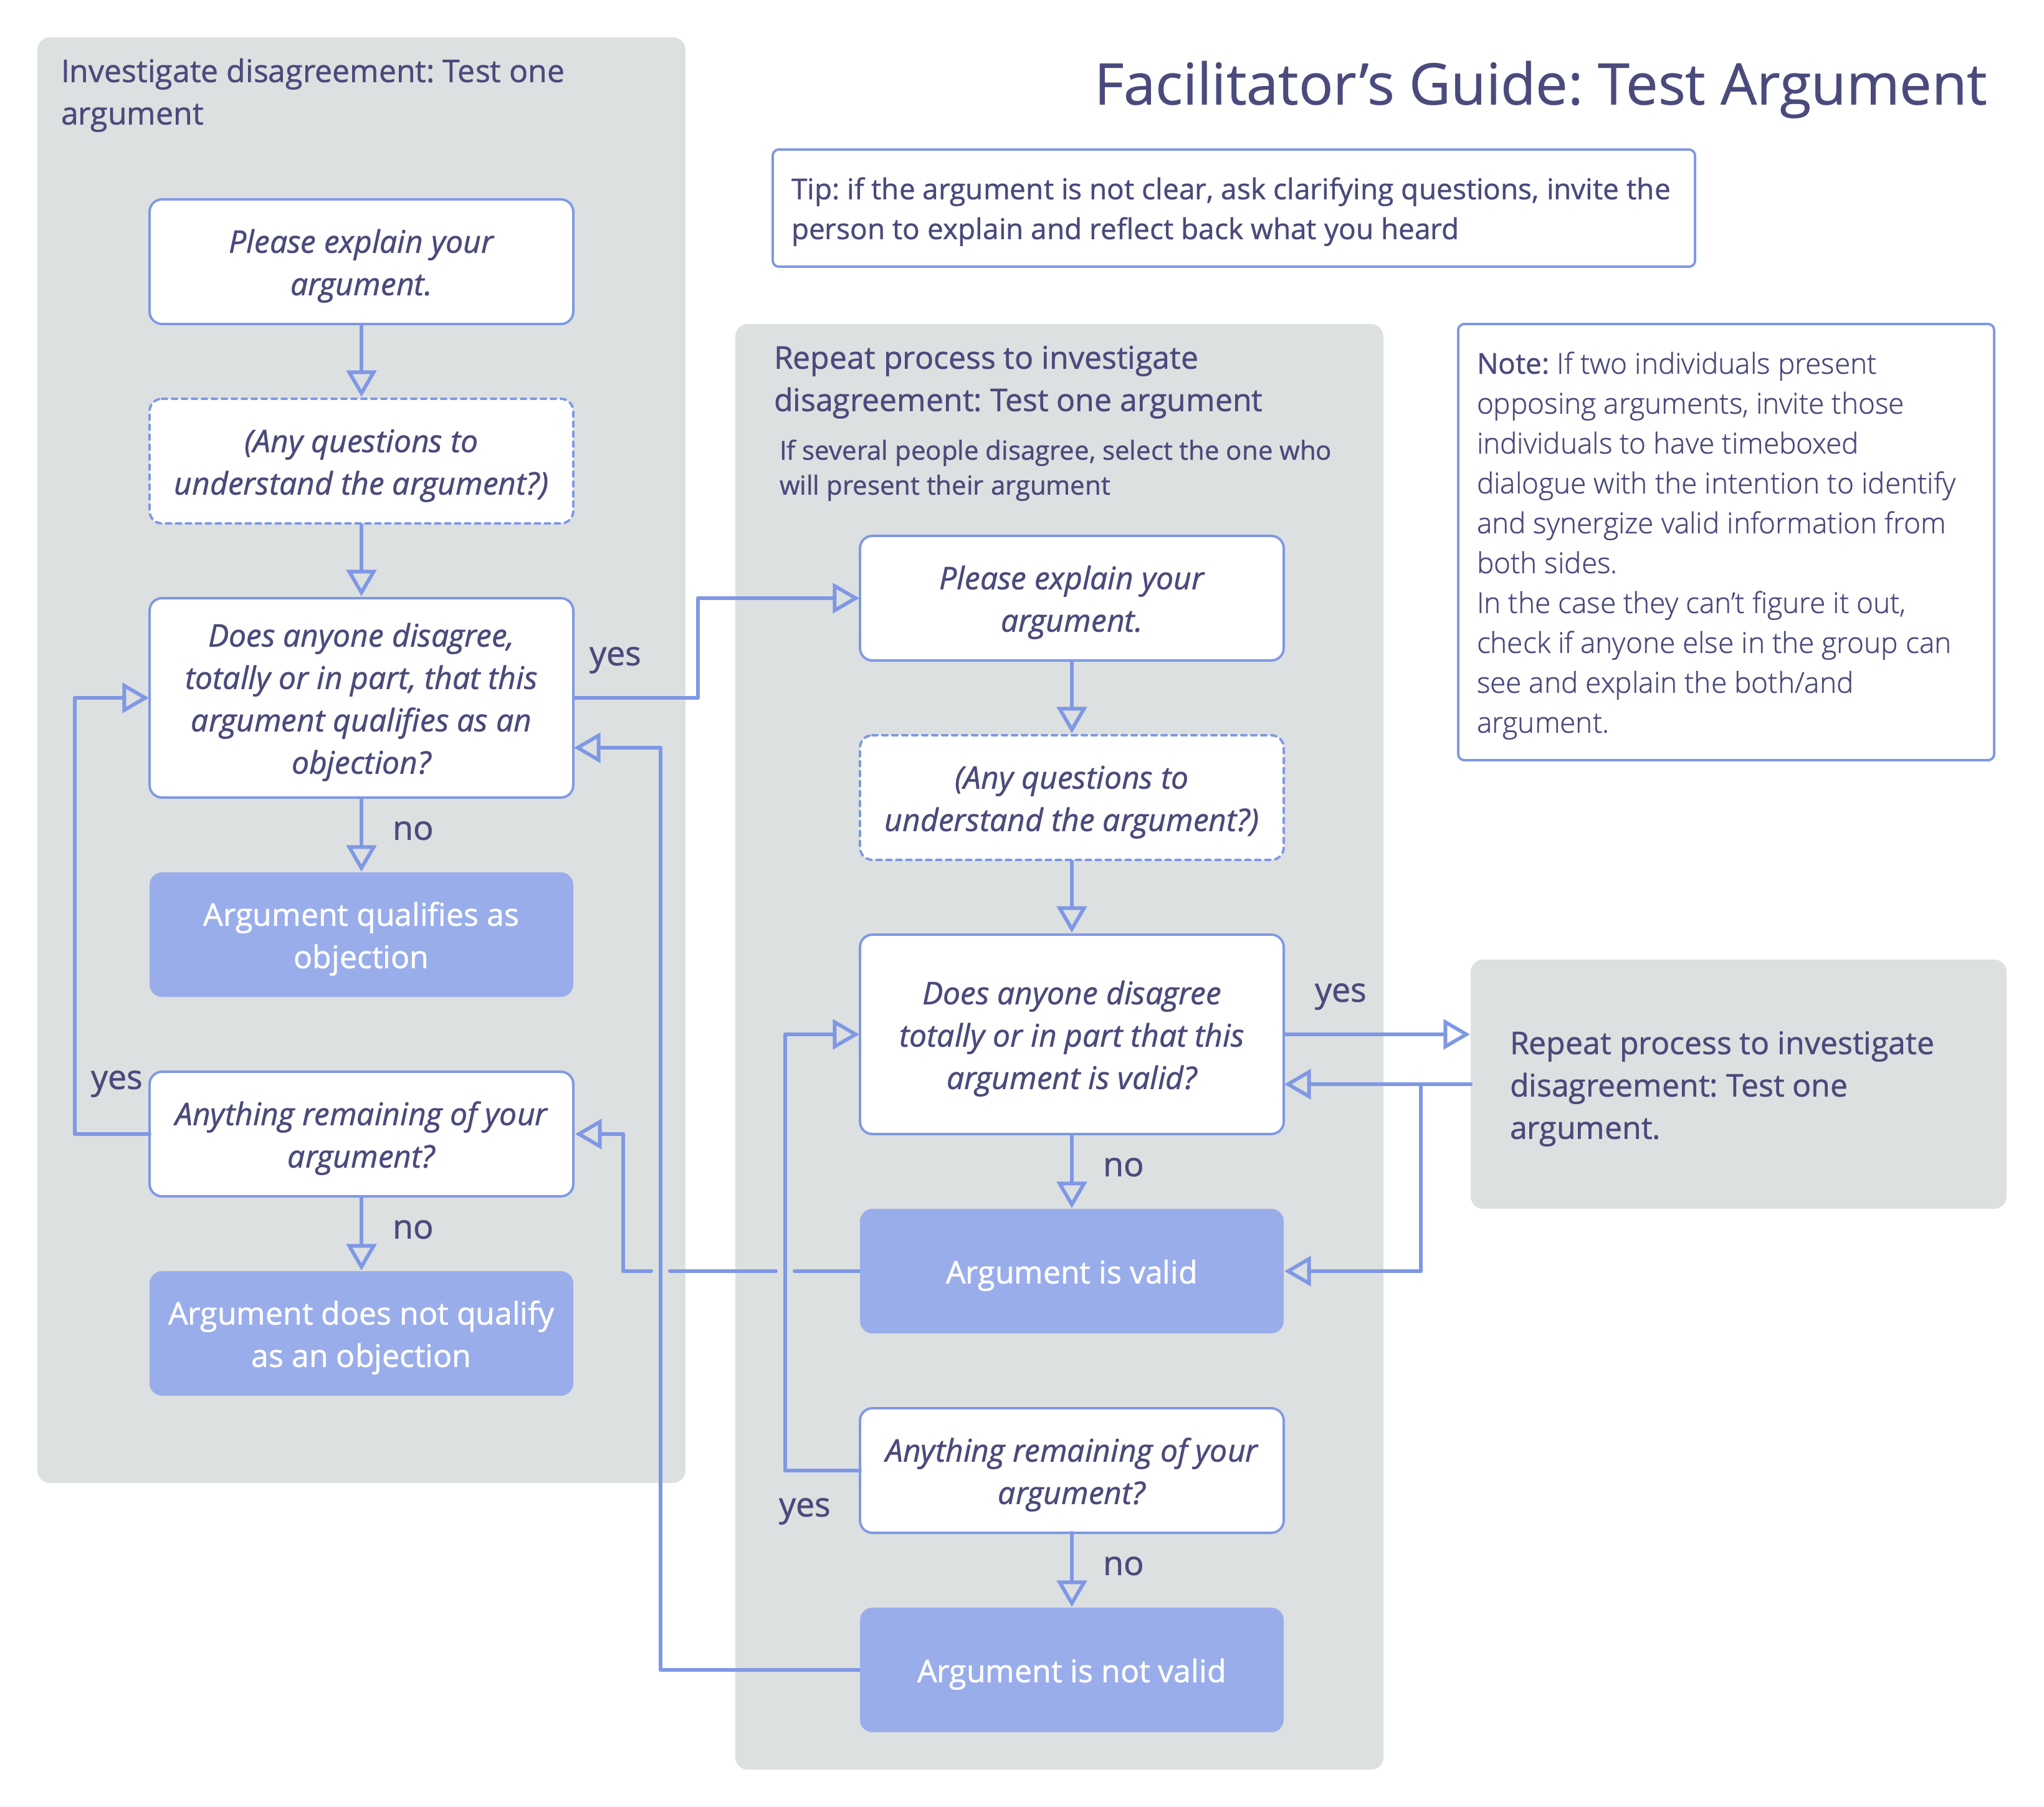 Facilitator's Guide: Test Arguments Qualify As Objections